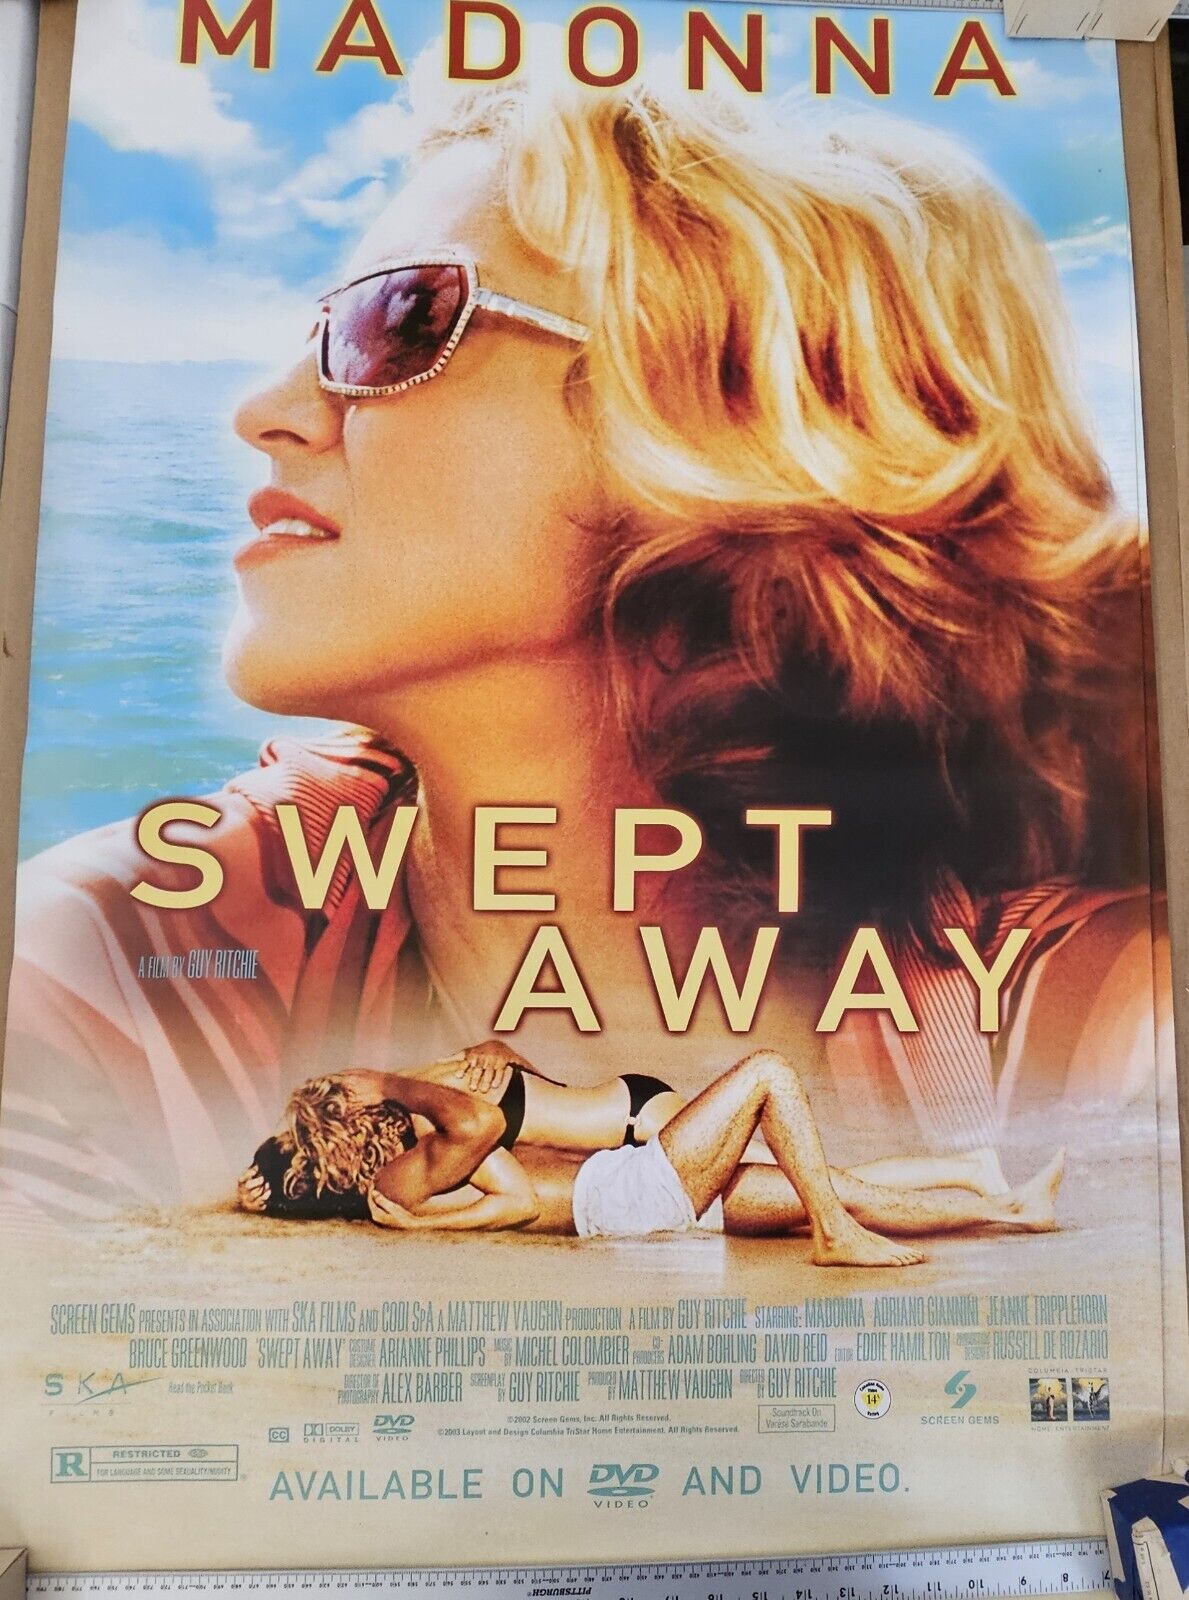 Madonna In Swept Away DVD promotional Movie poster